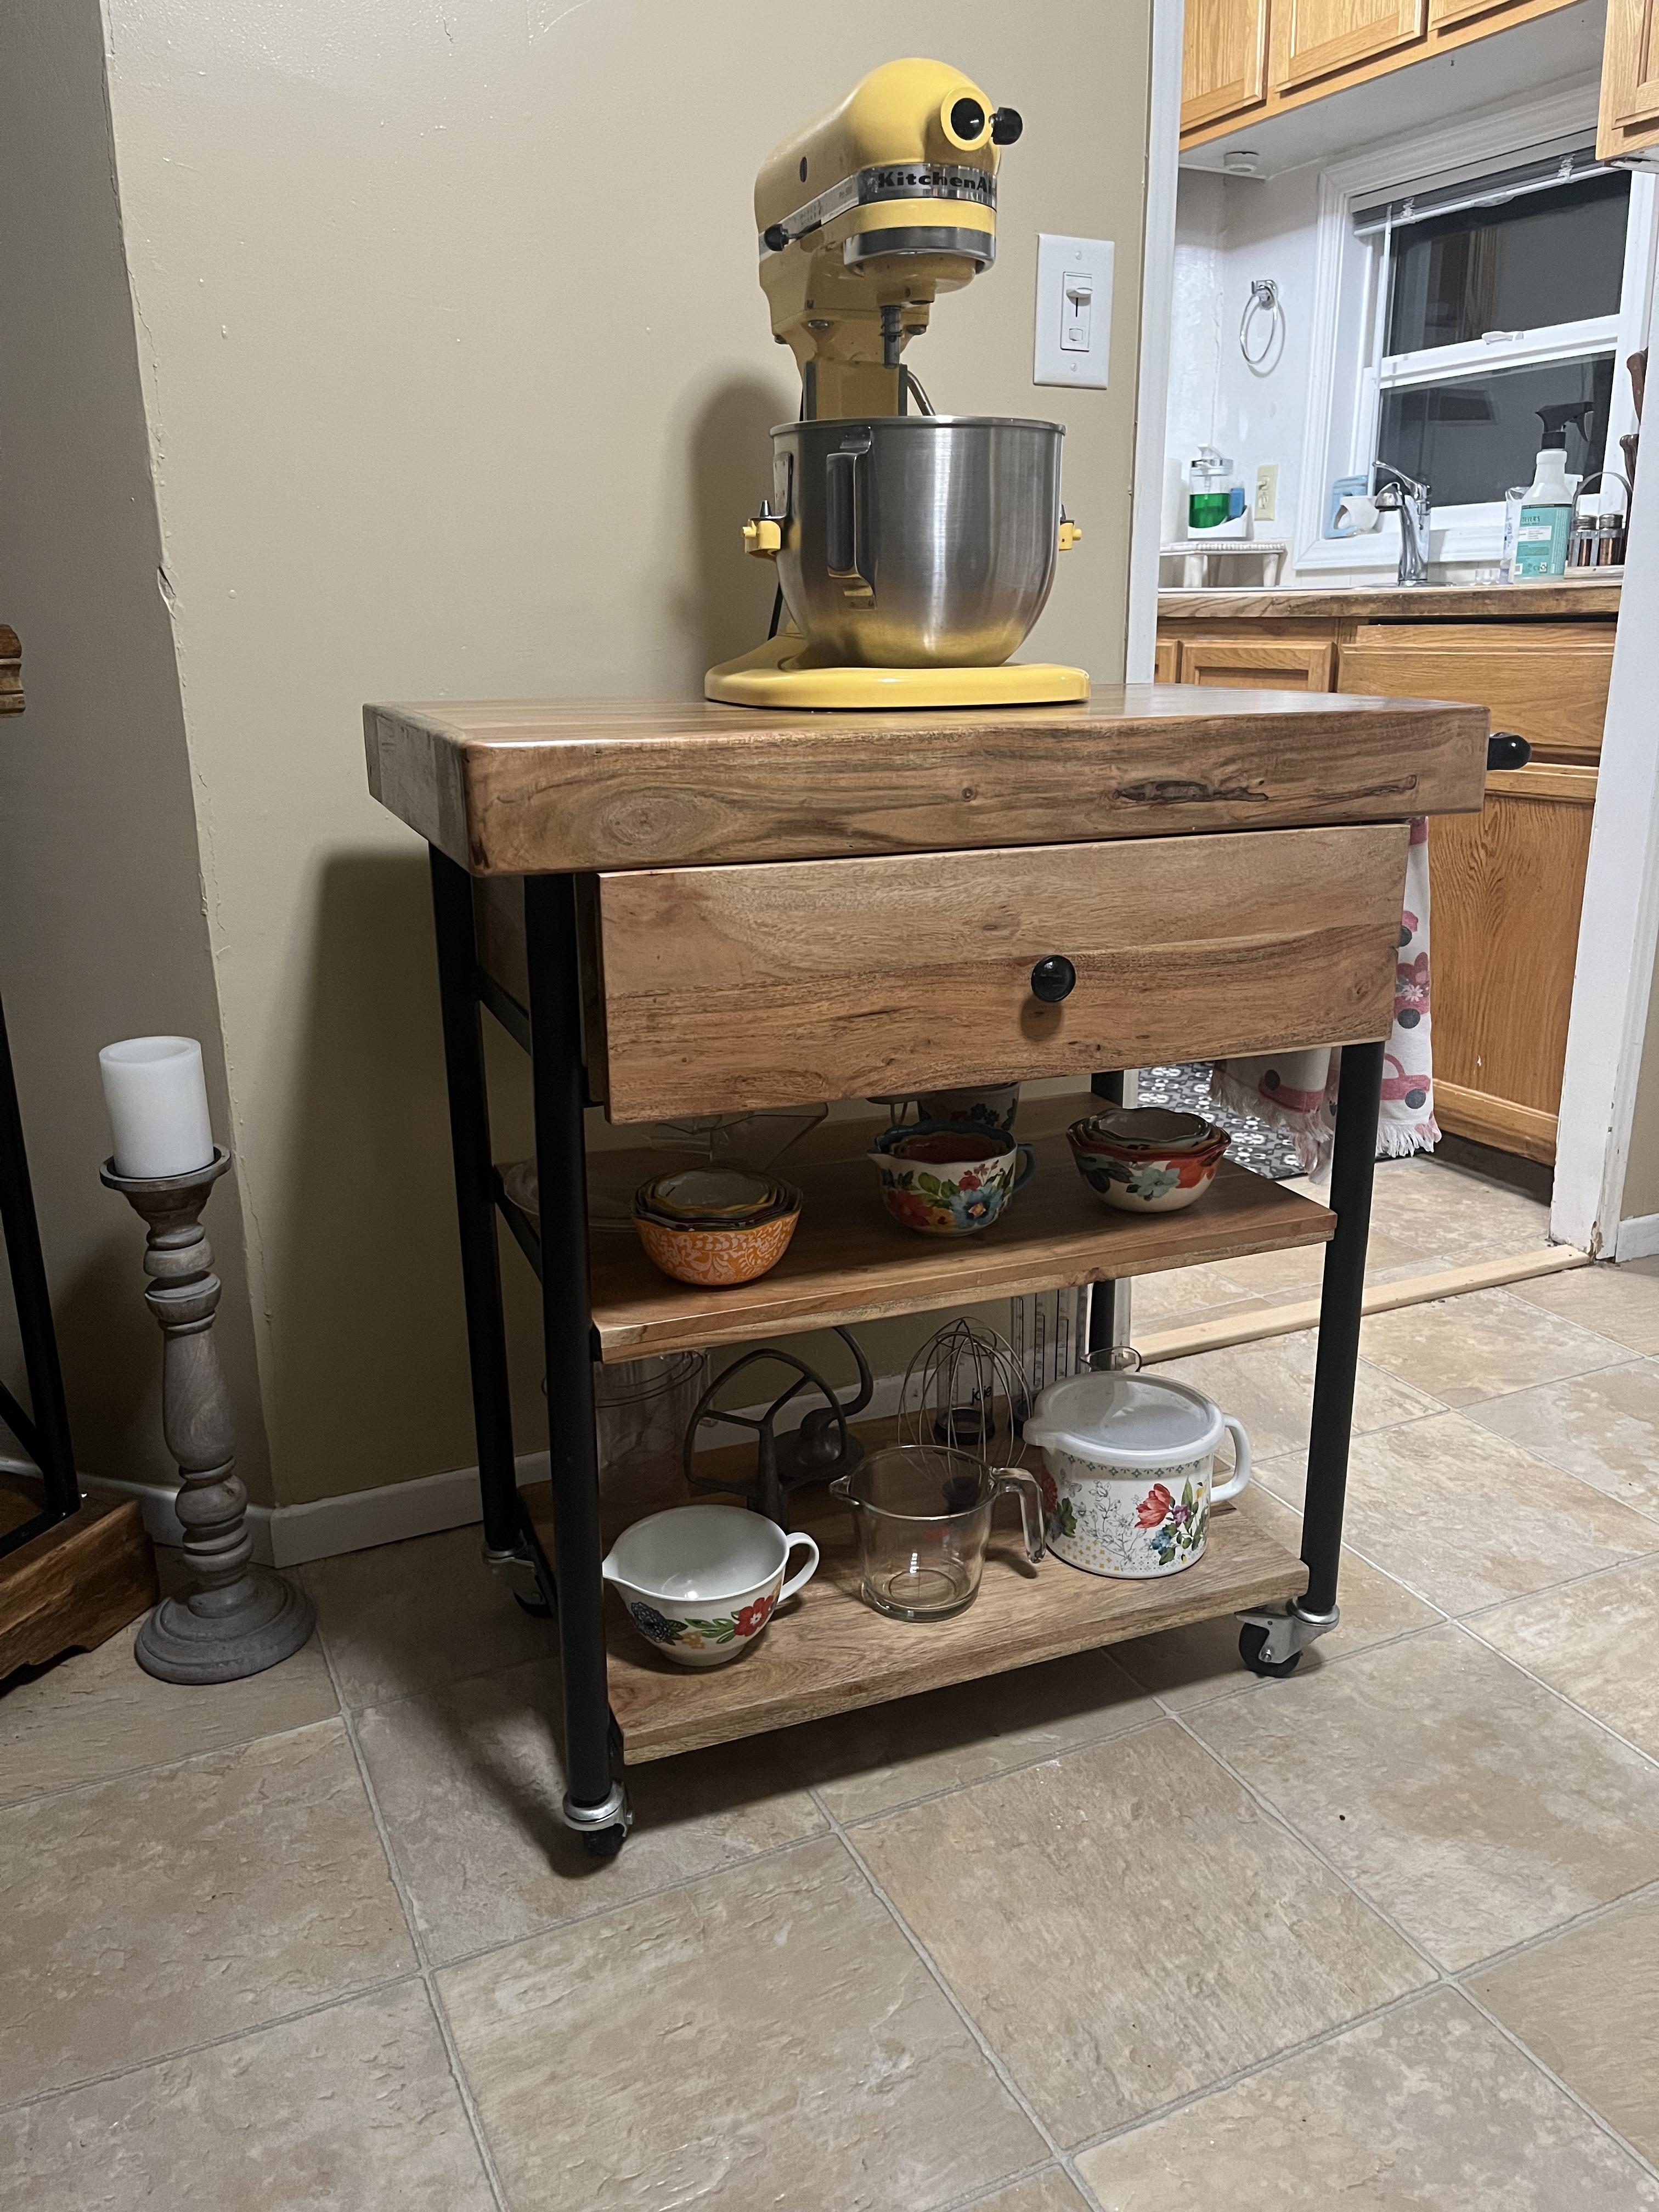 A mixer on top of a wood kitchen cart with various kitchen and baking supplies underneath